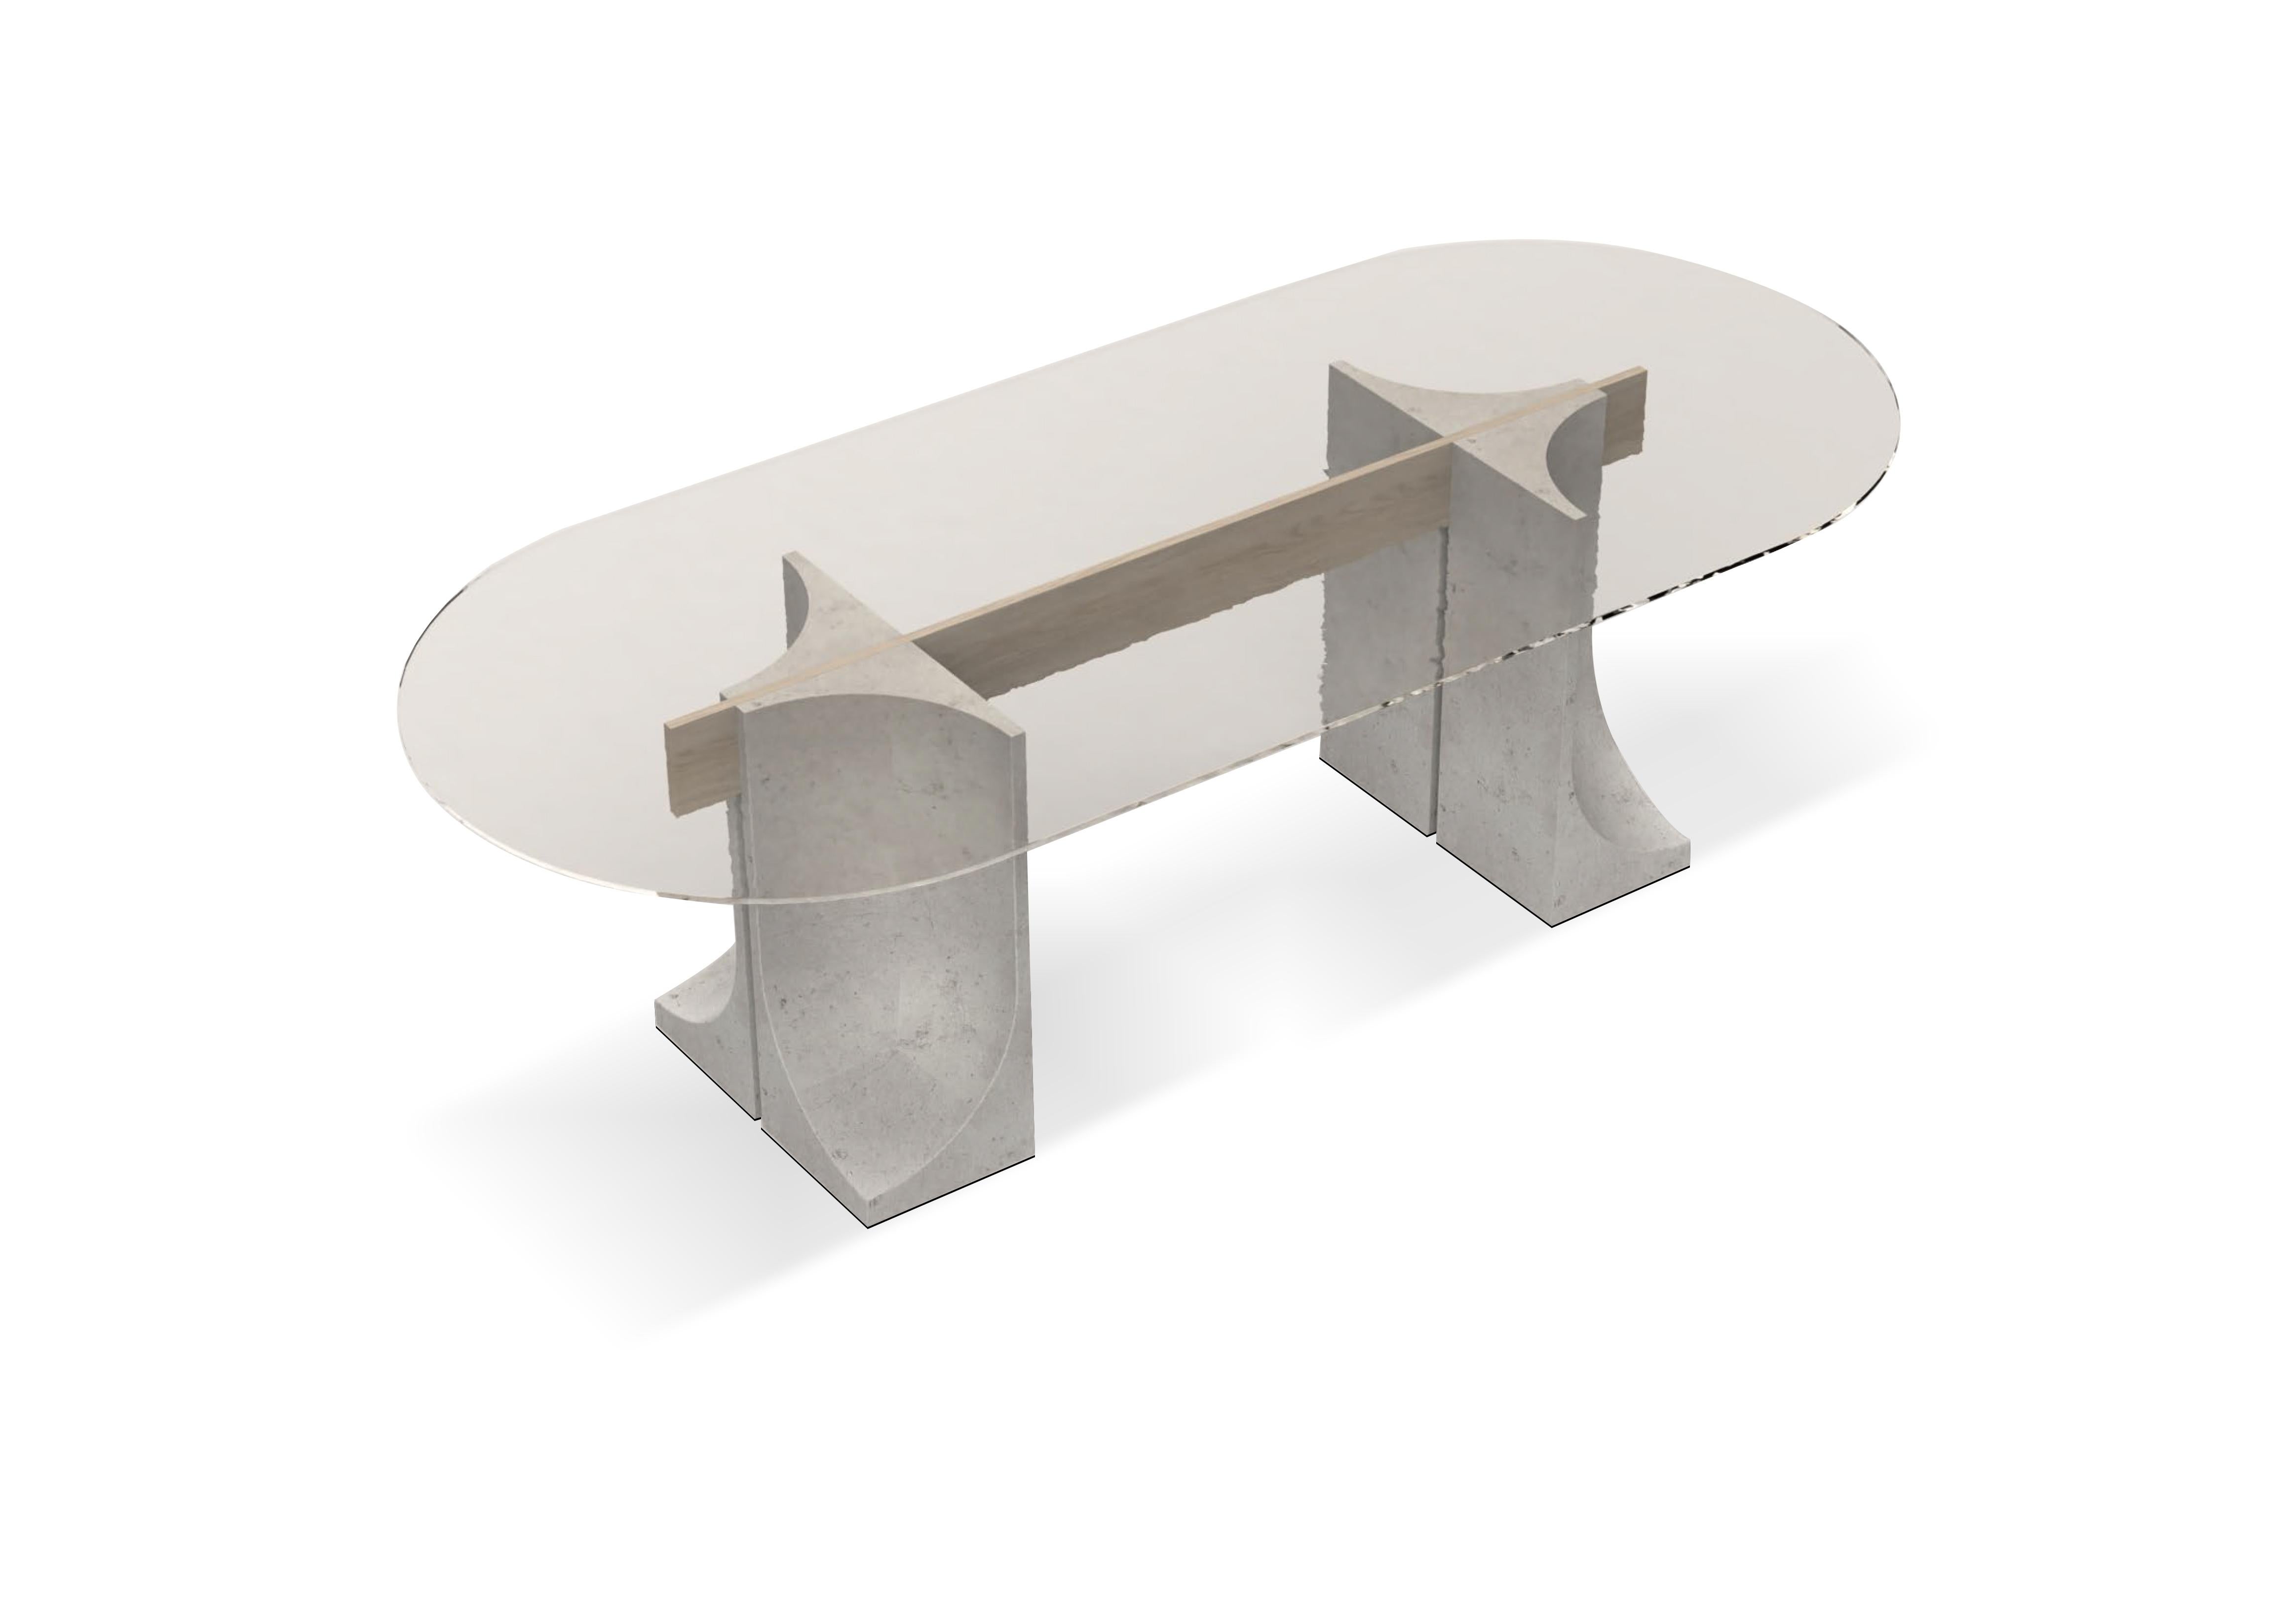 Contemporary Modern Edge Dining Table in Travertino Marble designed by Ferriani Bolgi for Collector Studio.

DIMENSIONS
W 250 cm  98,4”
D 110cm  43,3”
H 78 cm  30,7”

PRODUCT FEATURES
Table top in glass or cast glass.
Legs in travertino and